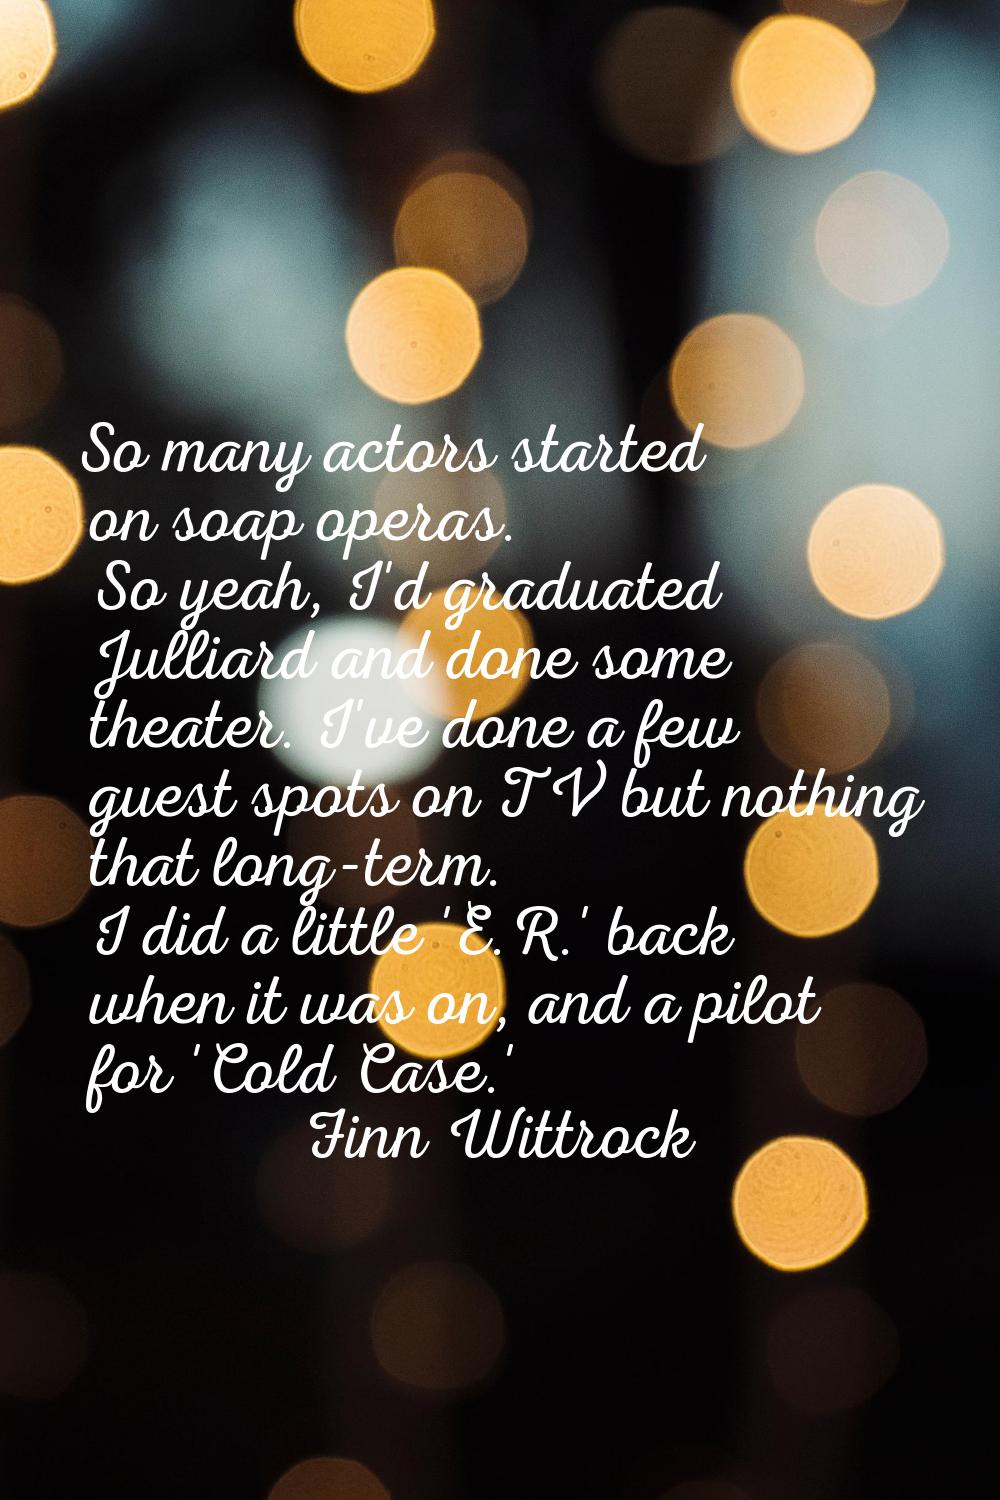 So many actors started on soap operas. So yeah, I'd graduated Julliard and done some theater. I've 